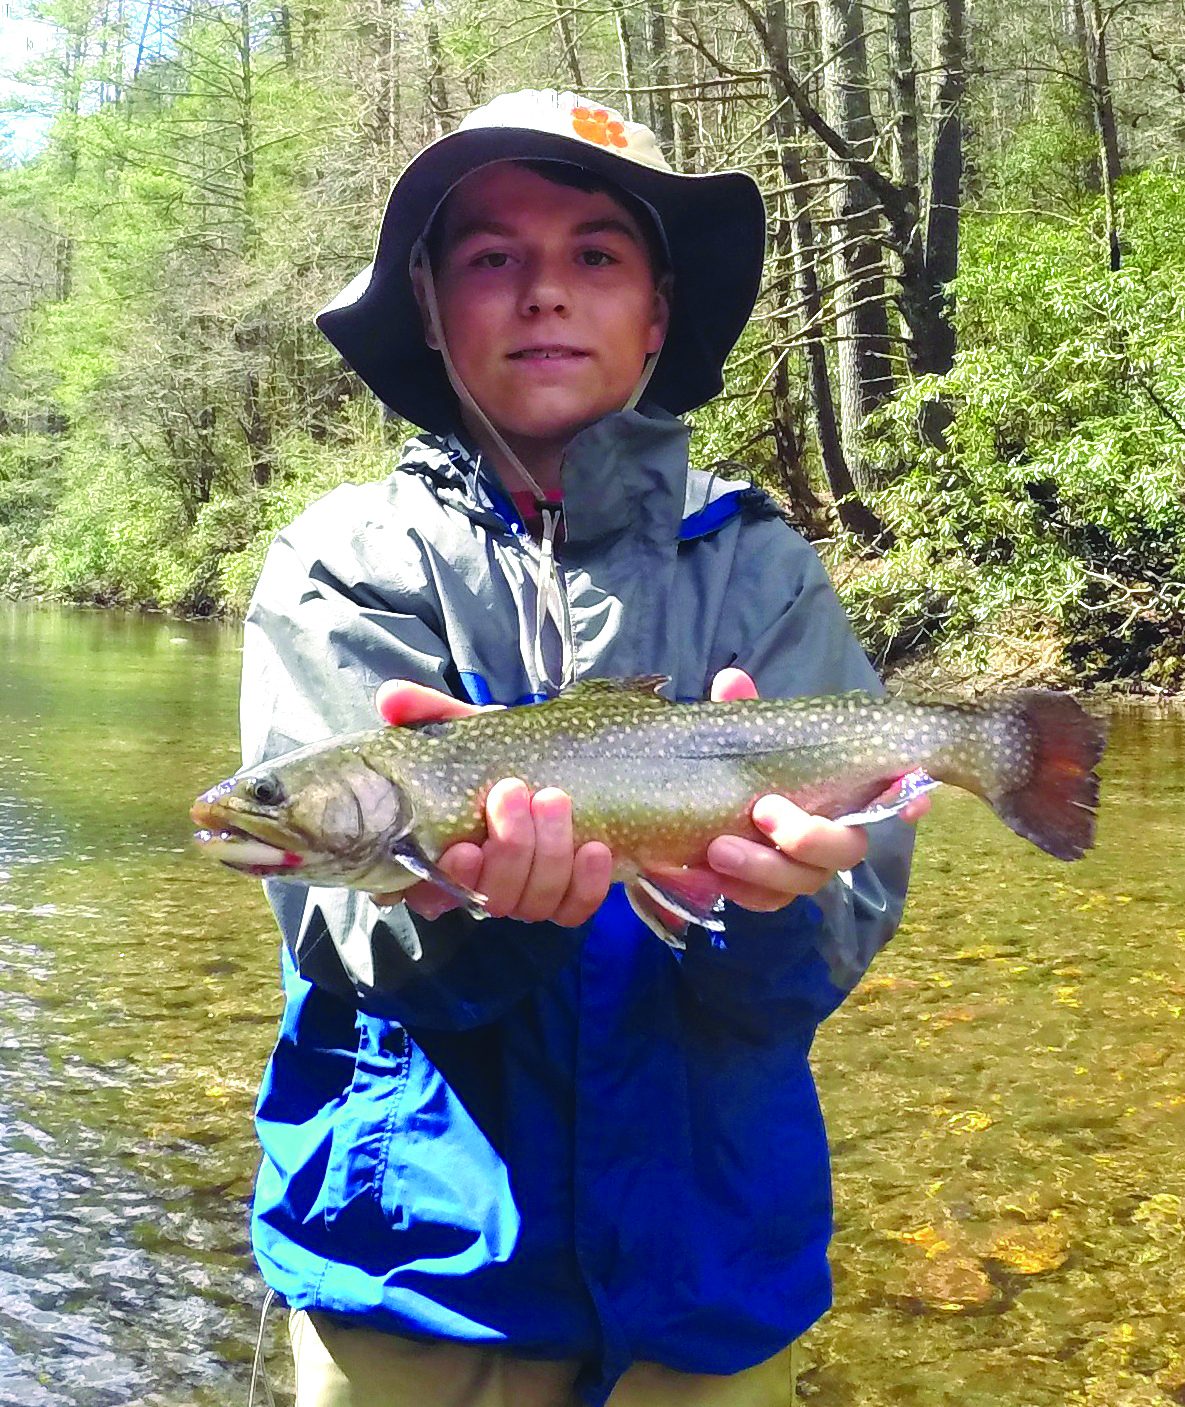 Bennett Mahon caught this beautiful brook trout on his first fly fishing trip on the Chattooga